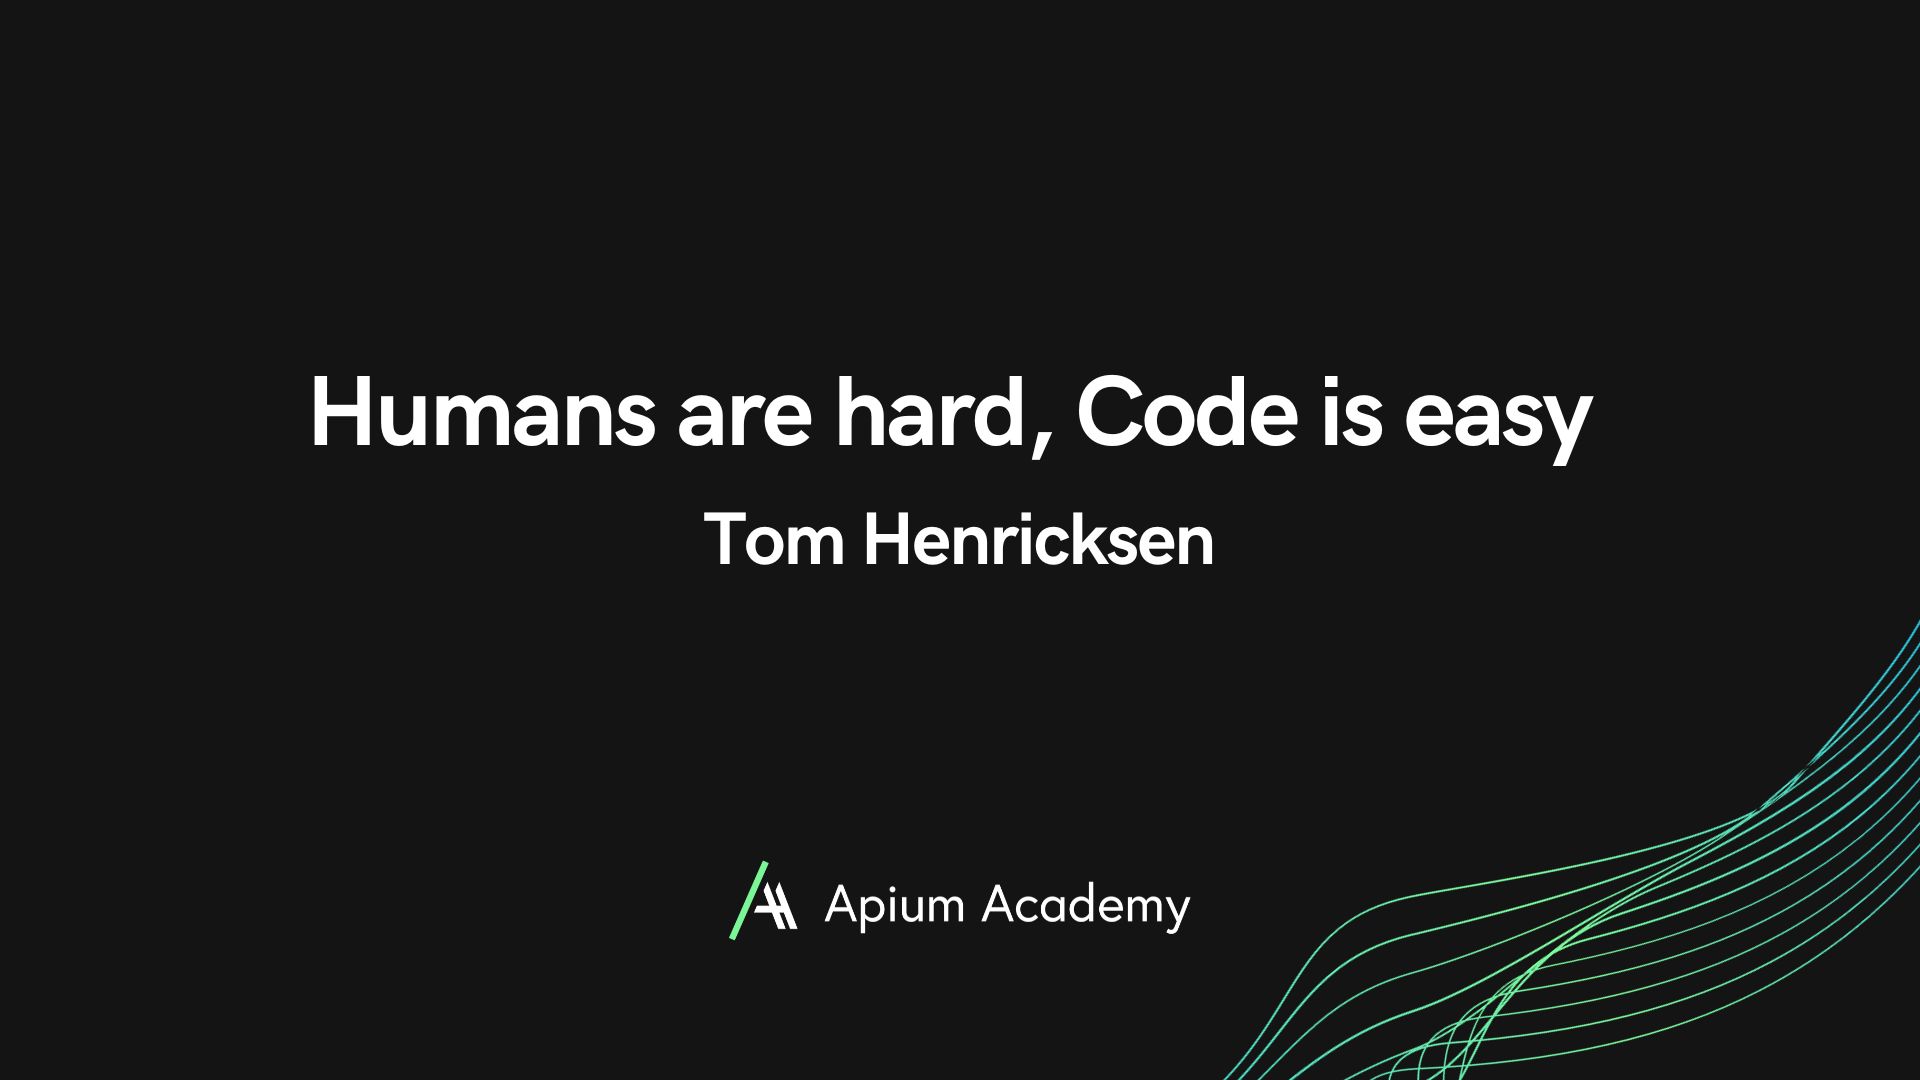 Humans are hard, Code is easy